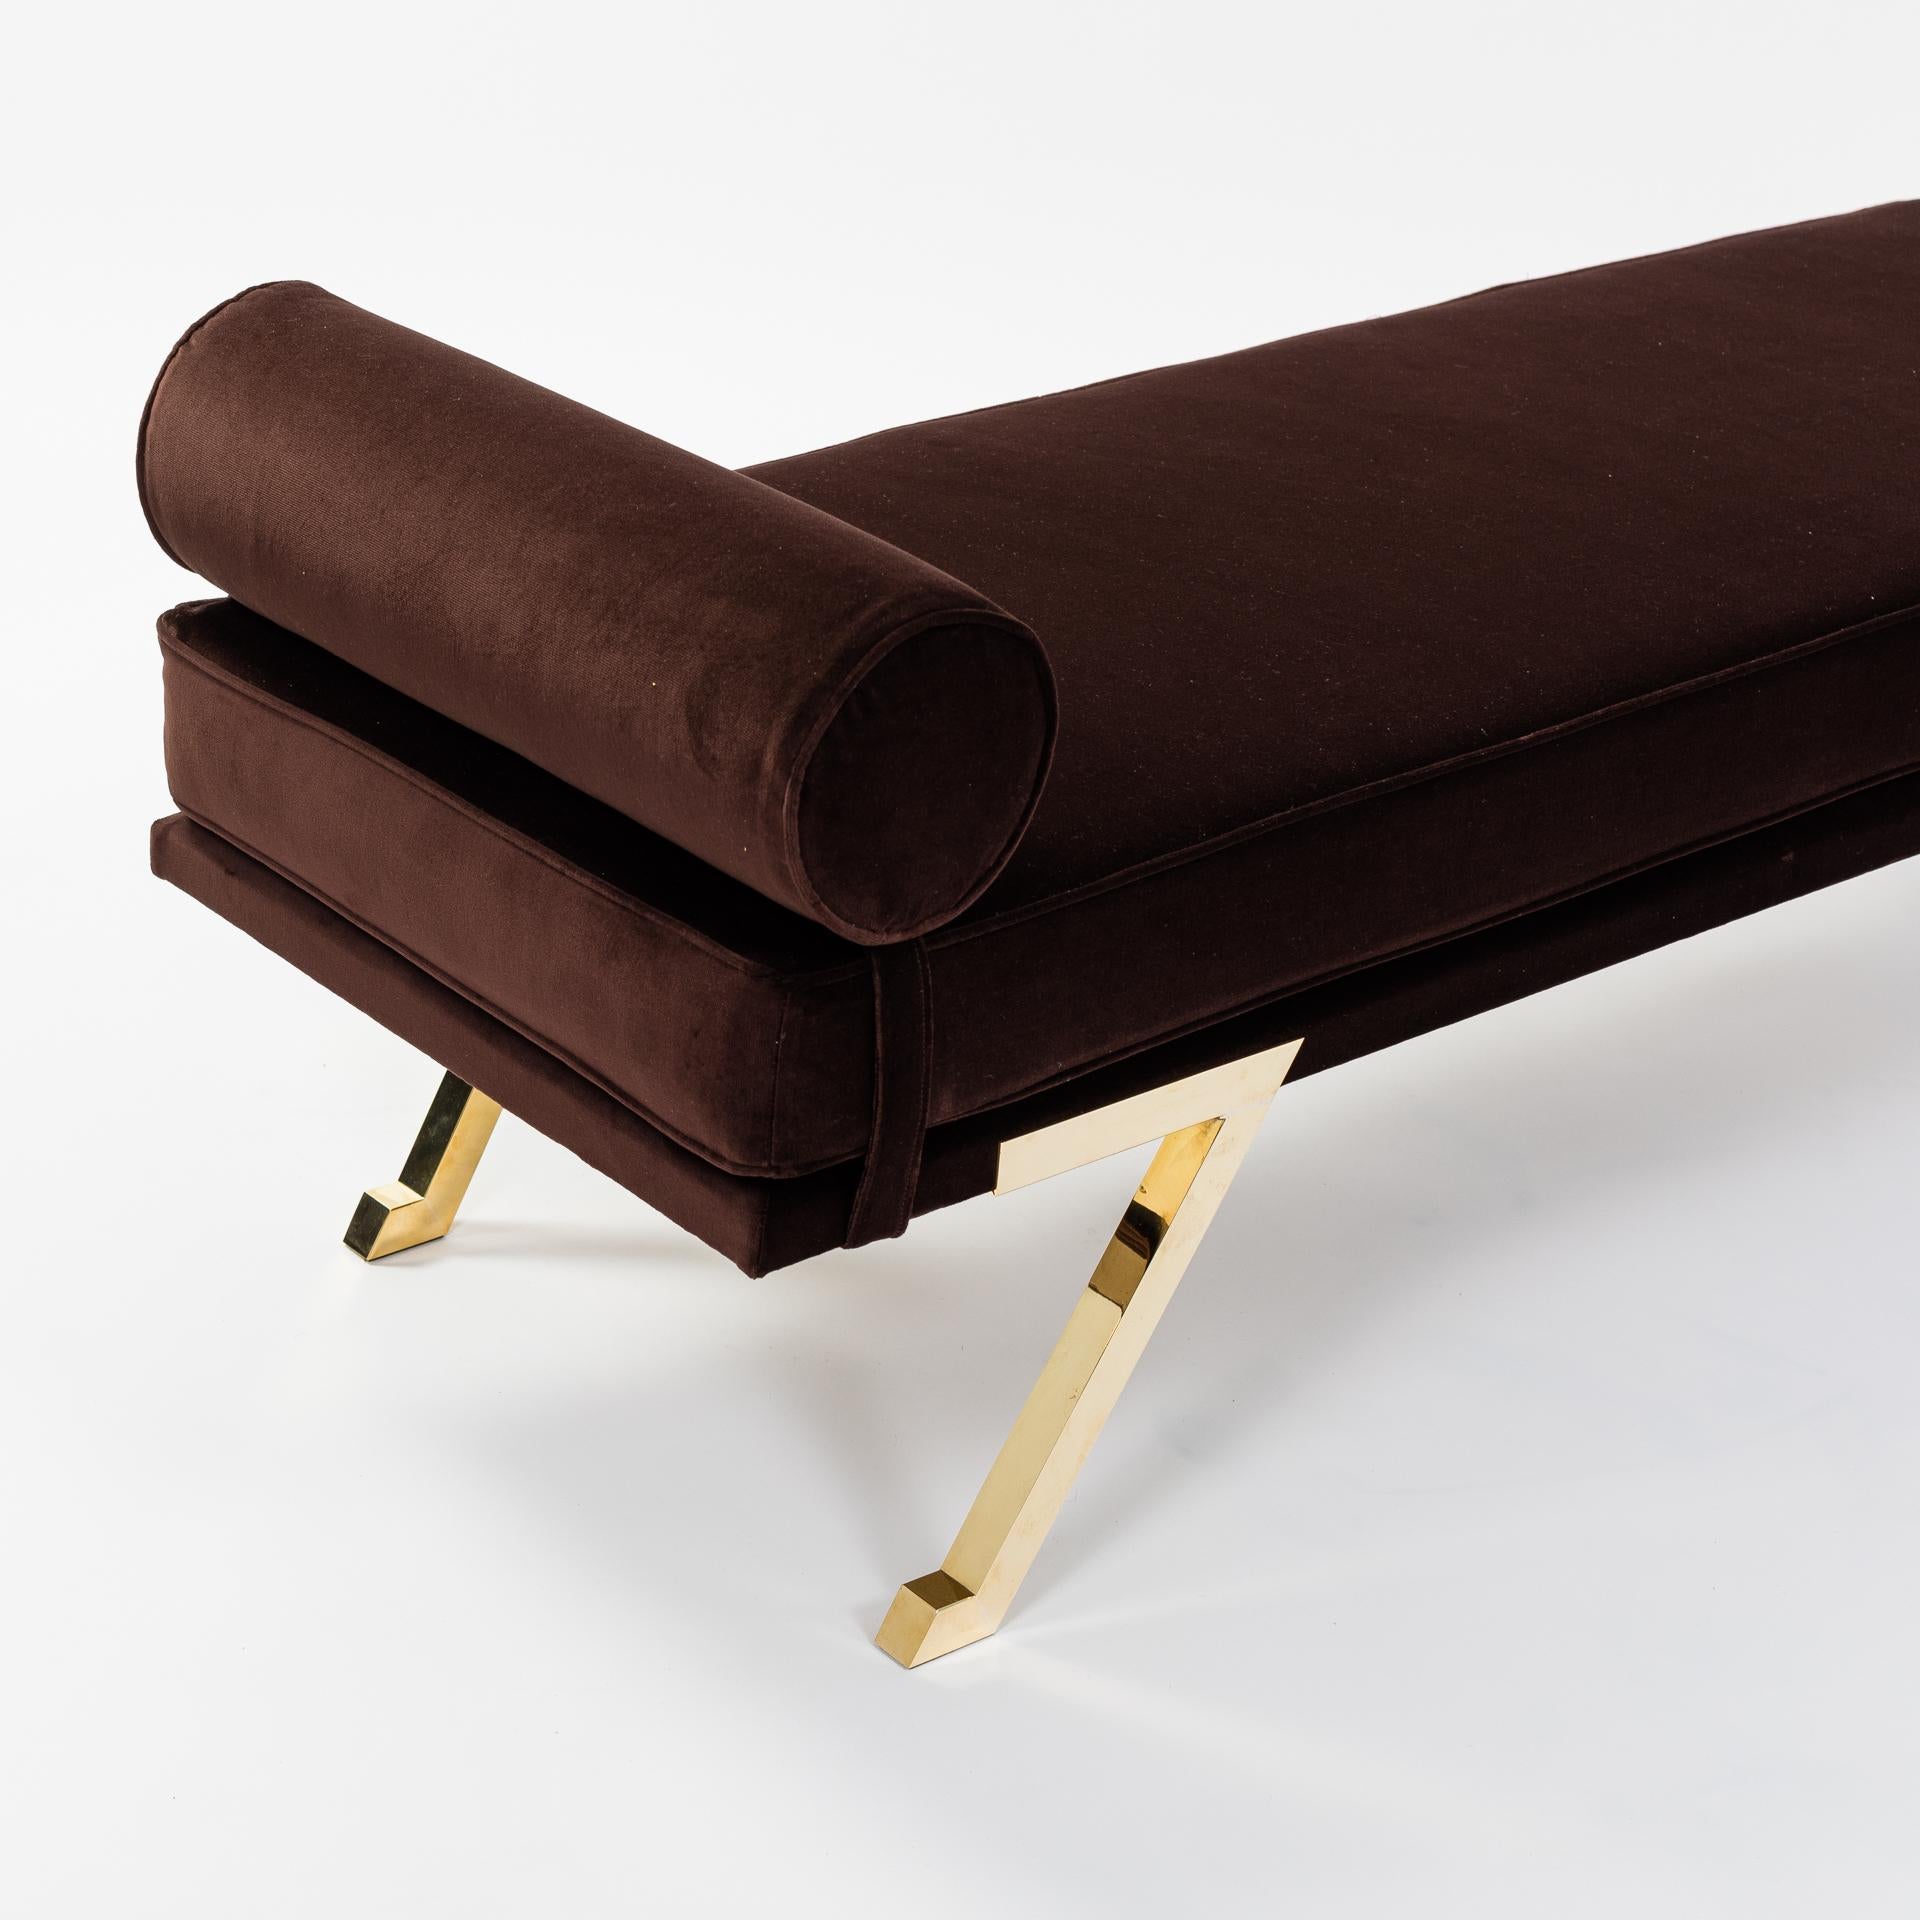 Italian Mid-Century Daybed / Bench Brass Legs, Chocolate Brown Velvet 1970s In Good Condition For Sale In Salzburg, AT